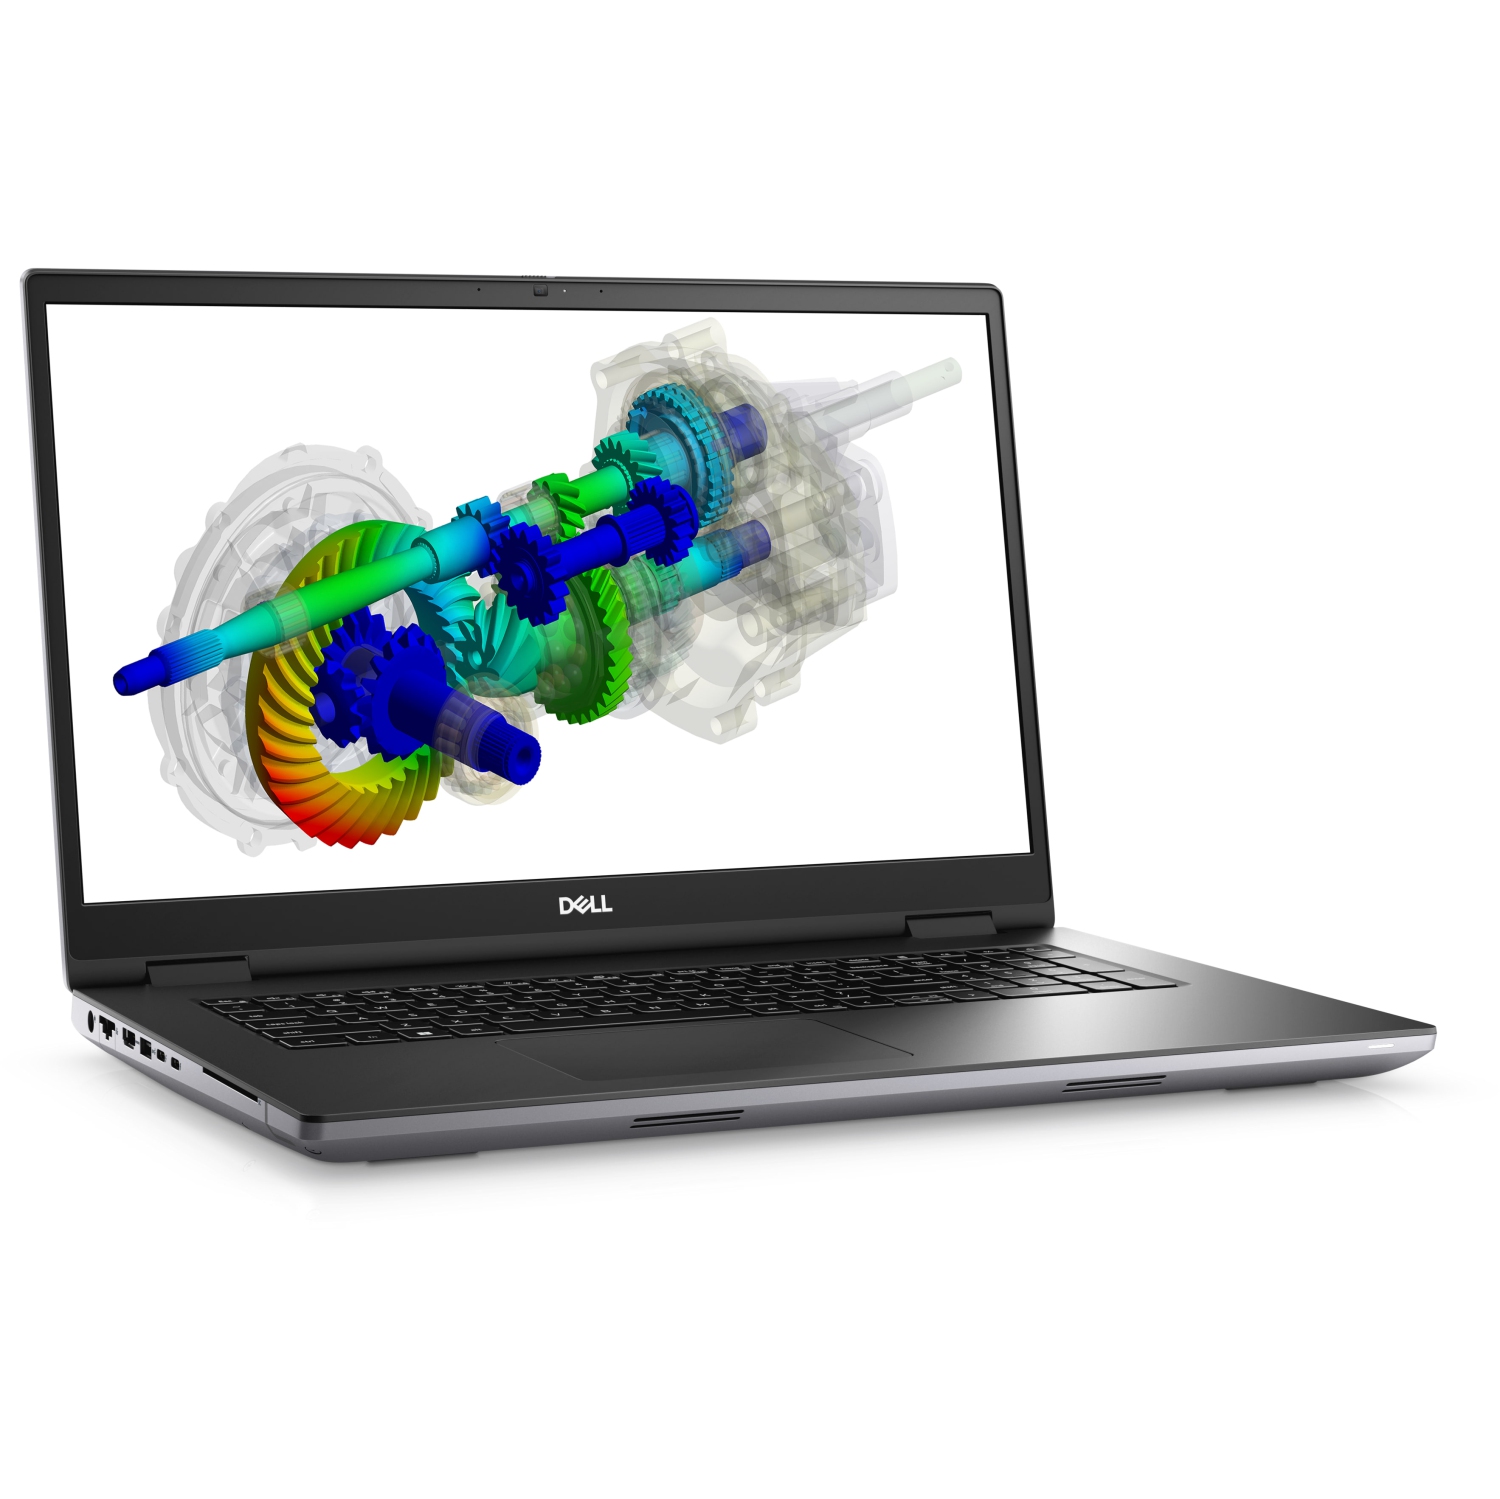 Refurbished (Excellent) – Dell Precision 7000 7770 Workstation Laptop (2022) | 17.3" FHD | Core i9 - 4TB SSD + 1TB SSD - 32GB RAM | 16 Cores @ 5 GHz - 12th Gen CPU